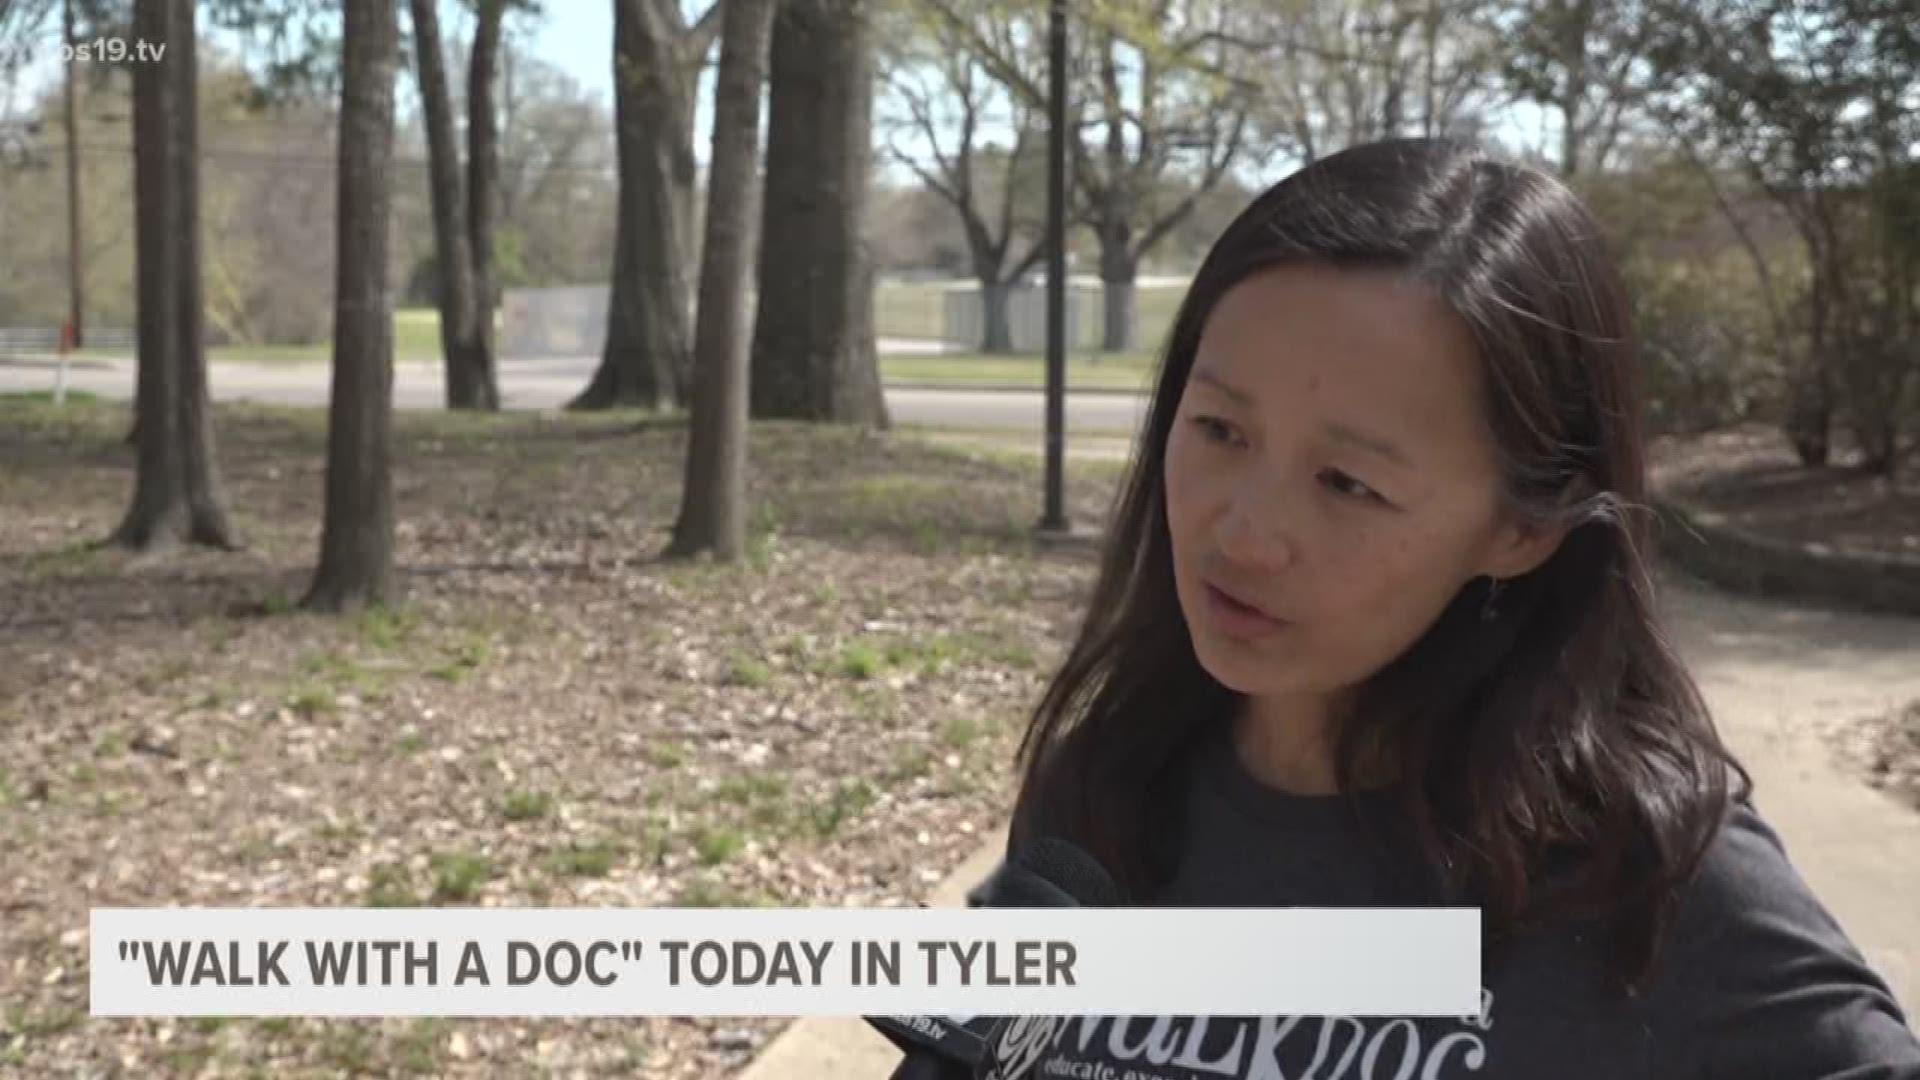 The Walk with a Doc program in Tyler is beginning it's fifth year of it's program. A local doctor and people from the community will meet at the Rose Rudman Park off Copeland Road to discuss health related topics.